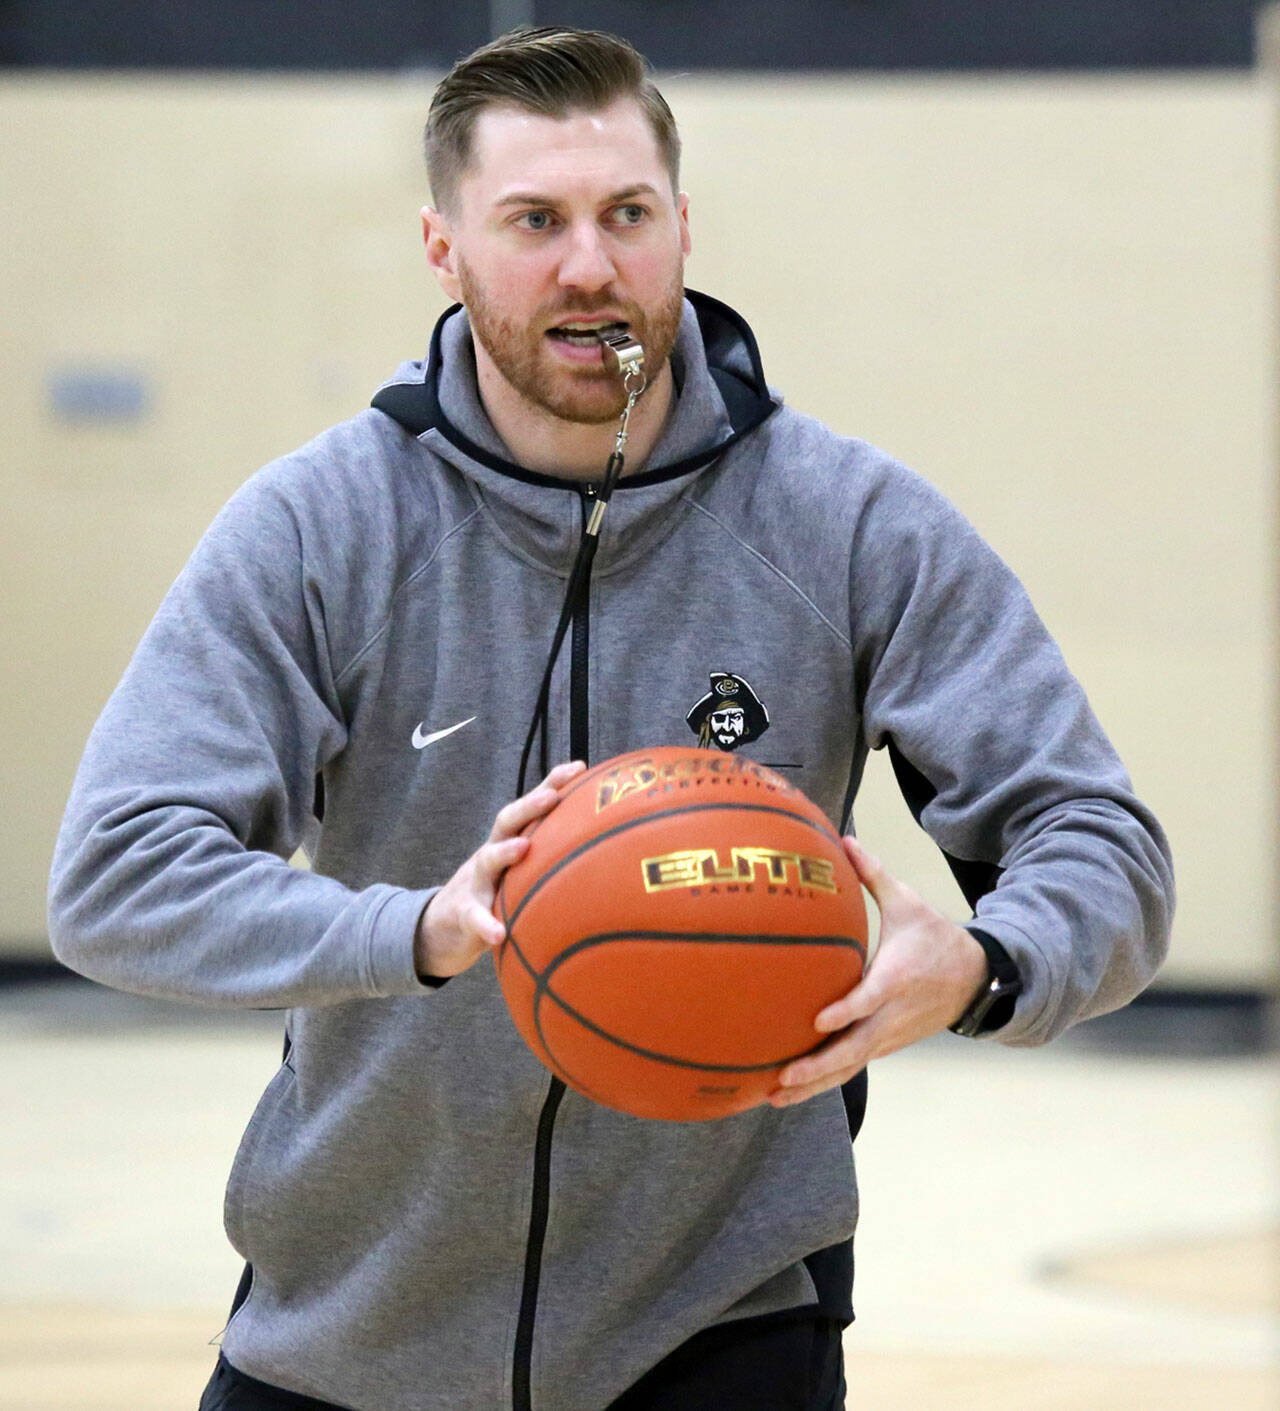 Peninsula College men’s basketball coach Donald Rollman conducts a drill during a recent practice. With 10 experienced players returning to a 16-player roster, the Pirates look to compete for a North Region title. (Peninsula College)